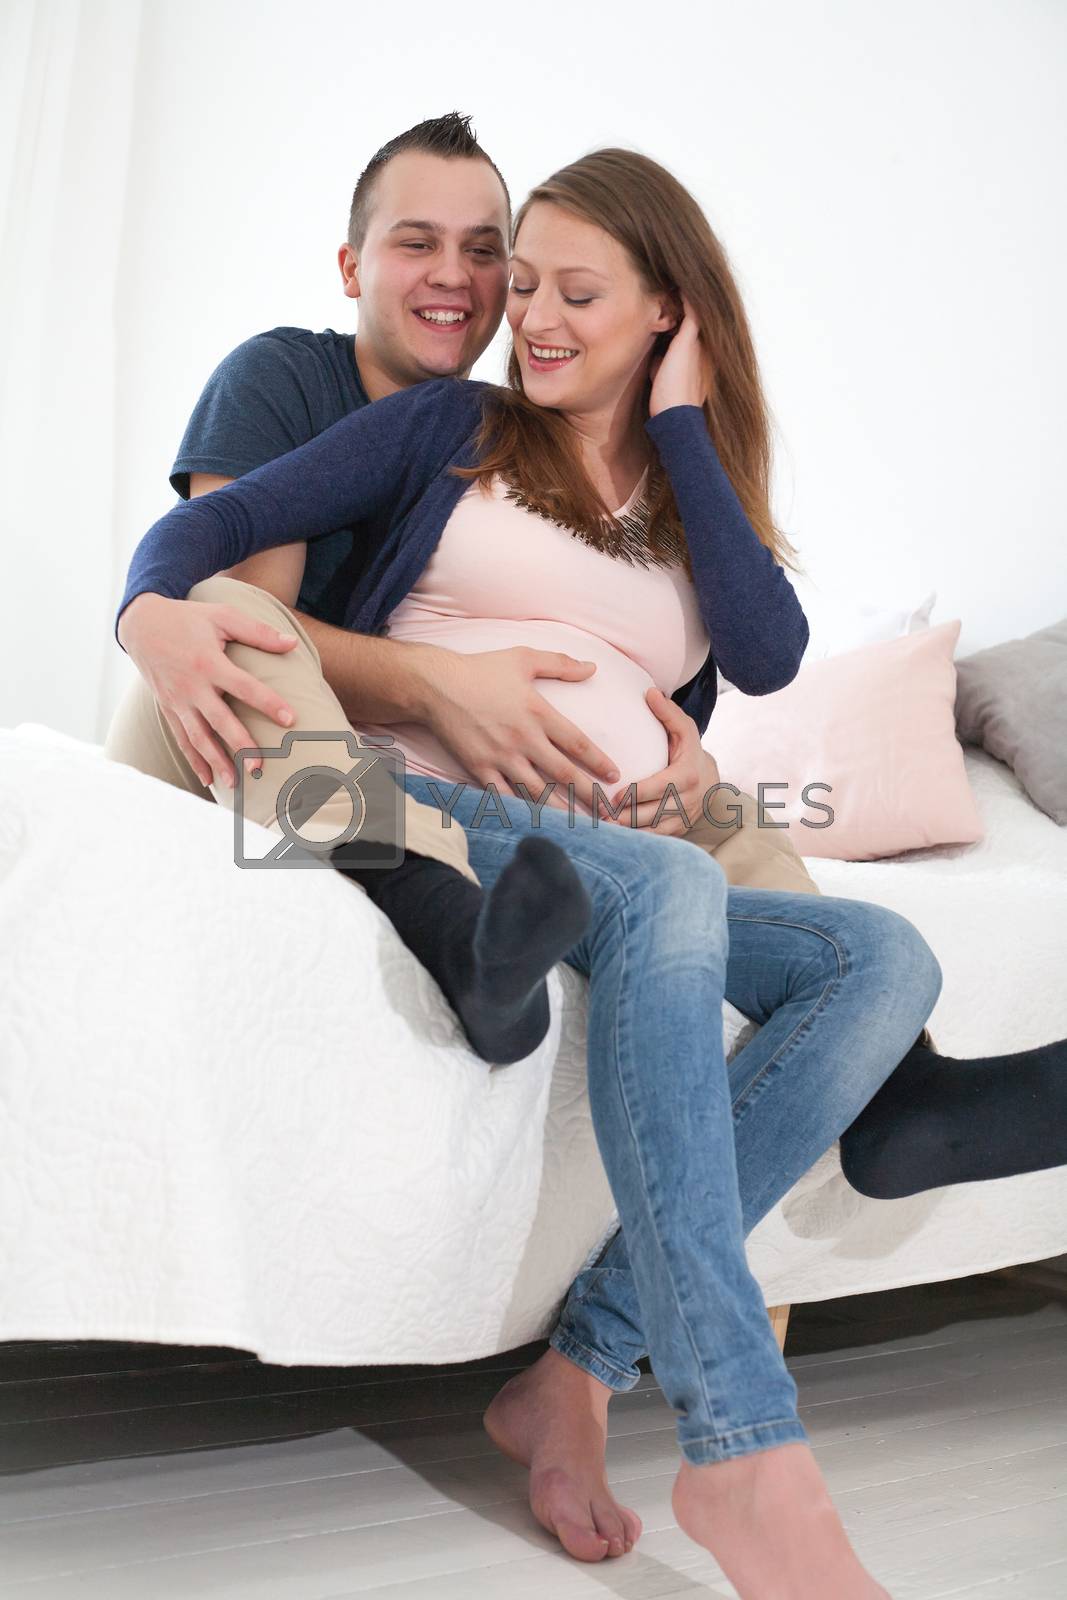 Royalty free image of happy young pregnant couple by DNFStyle